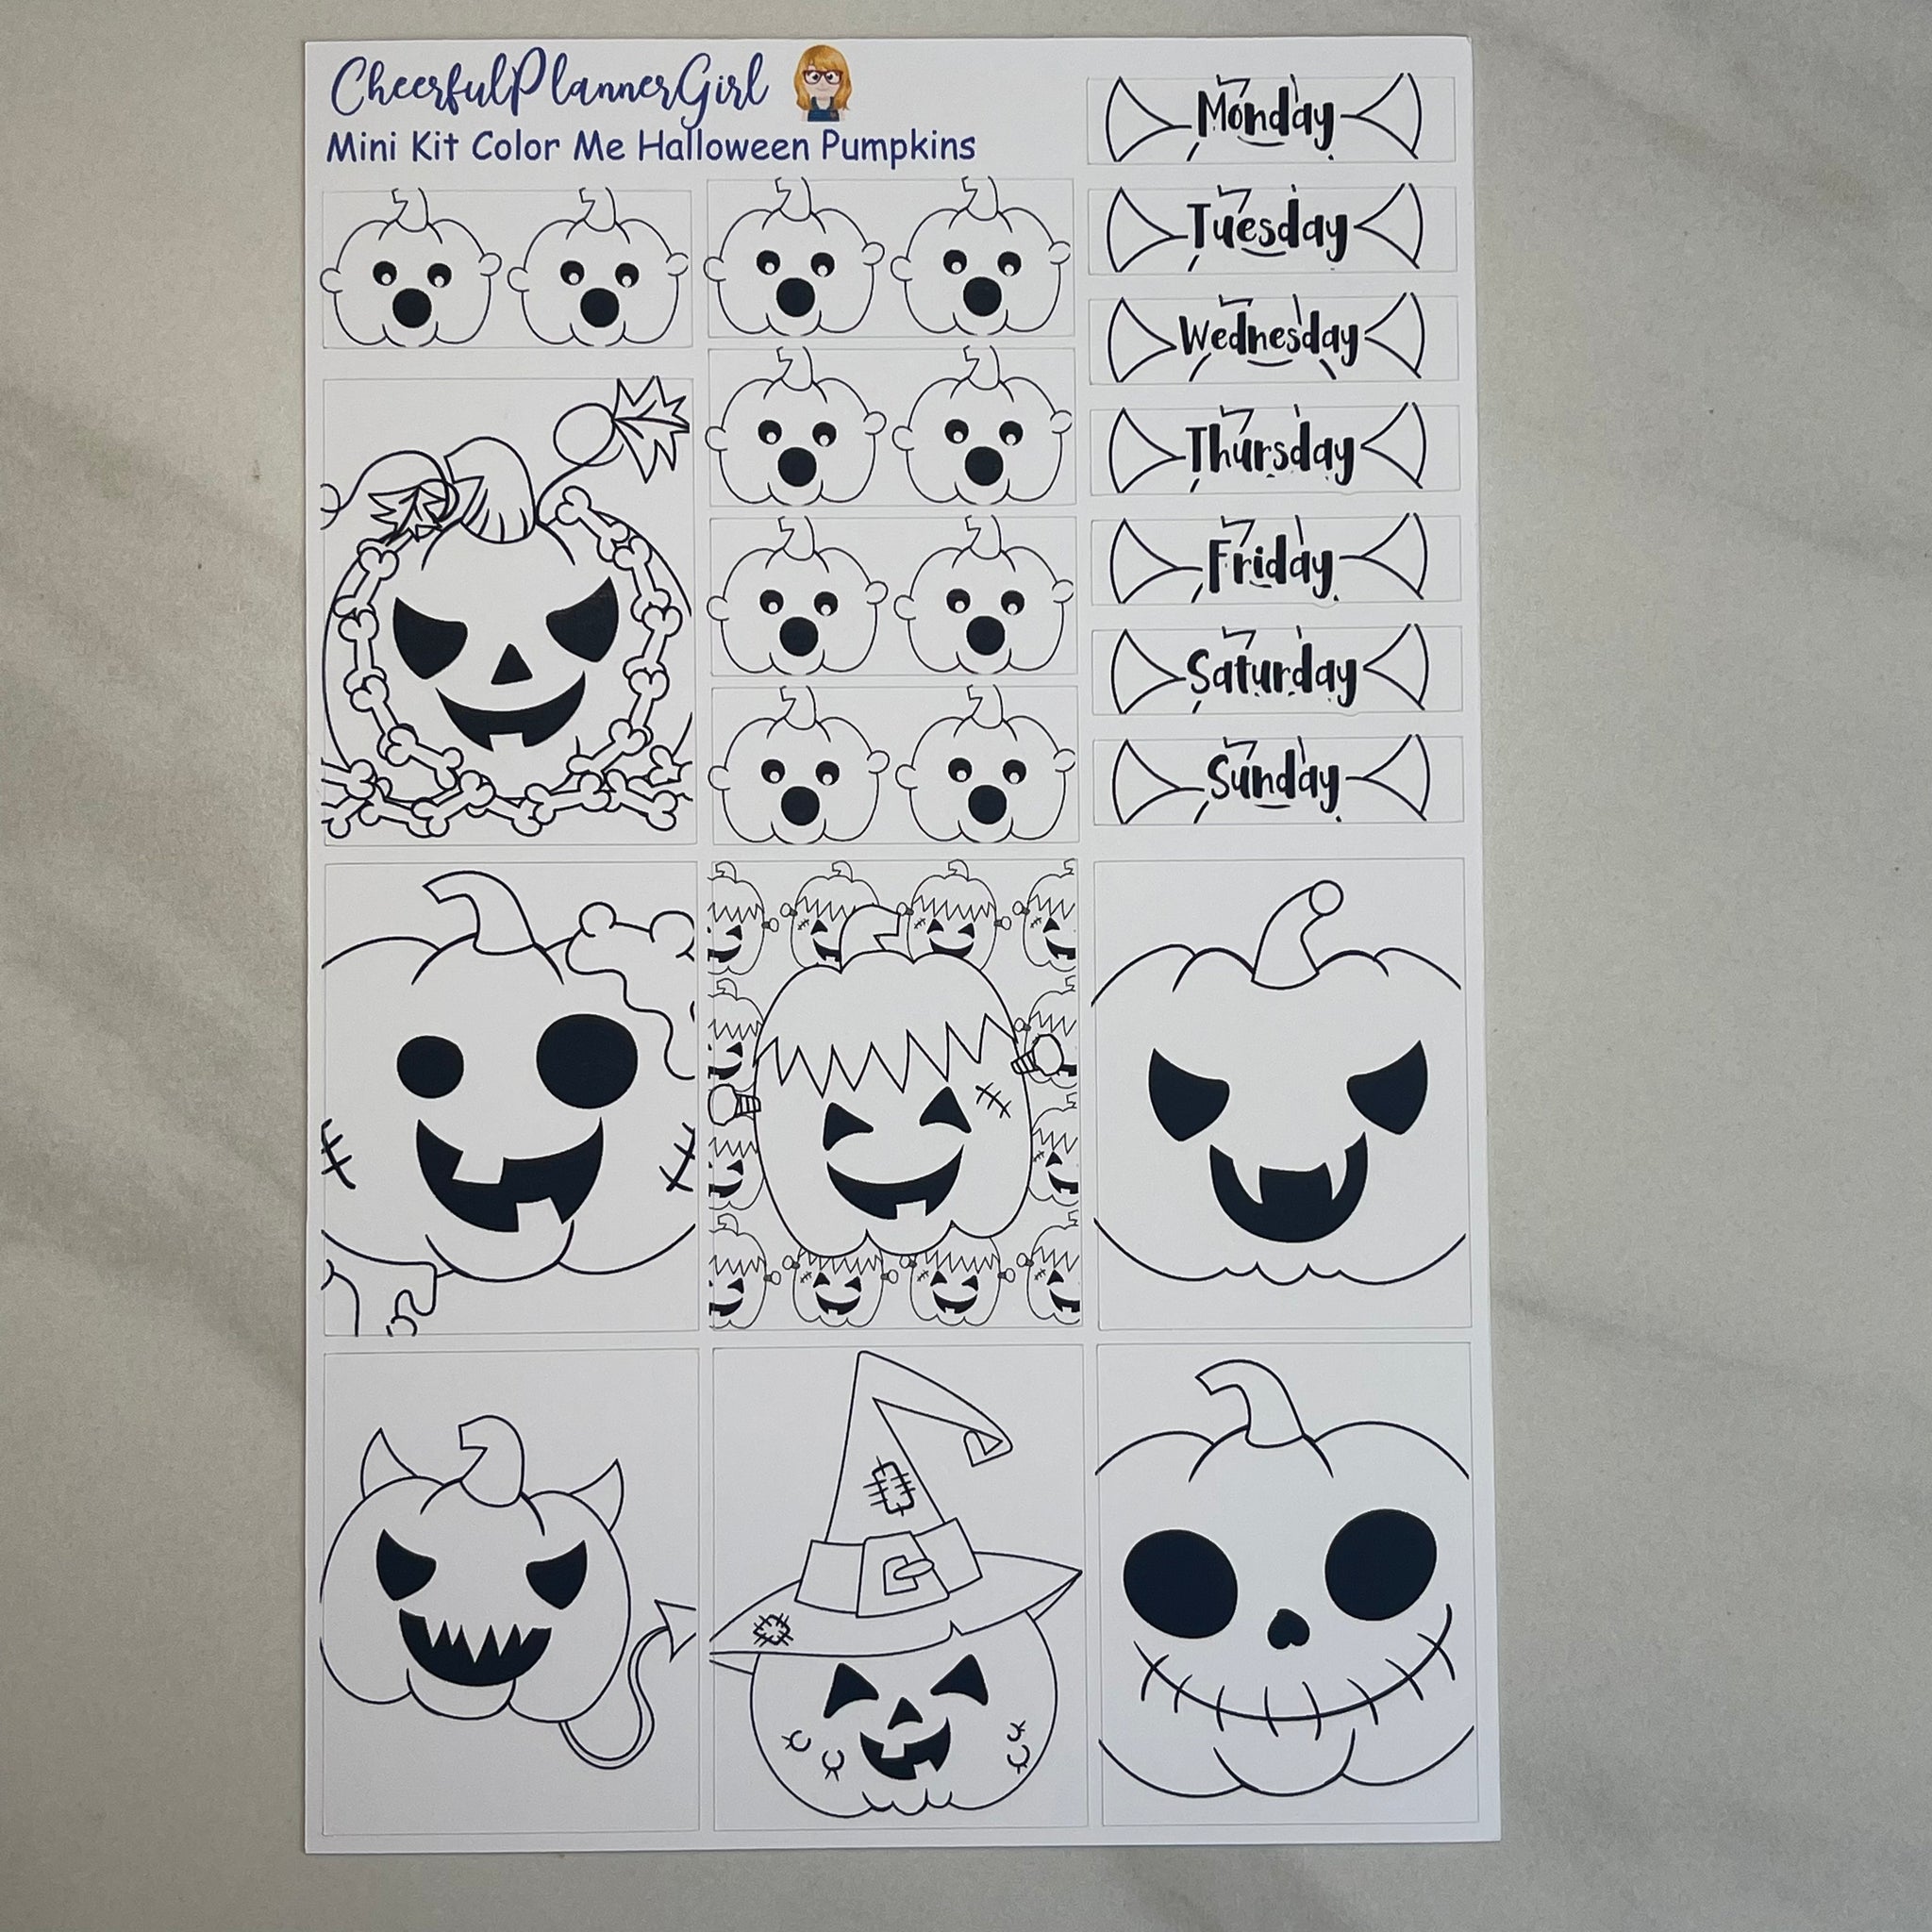 Color Me Halloween Pumpkins Mini Kit Weekly Layout Planner Stickers